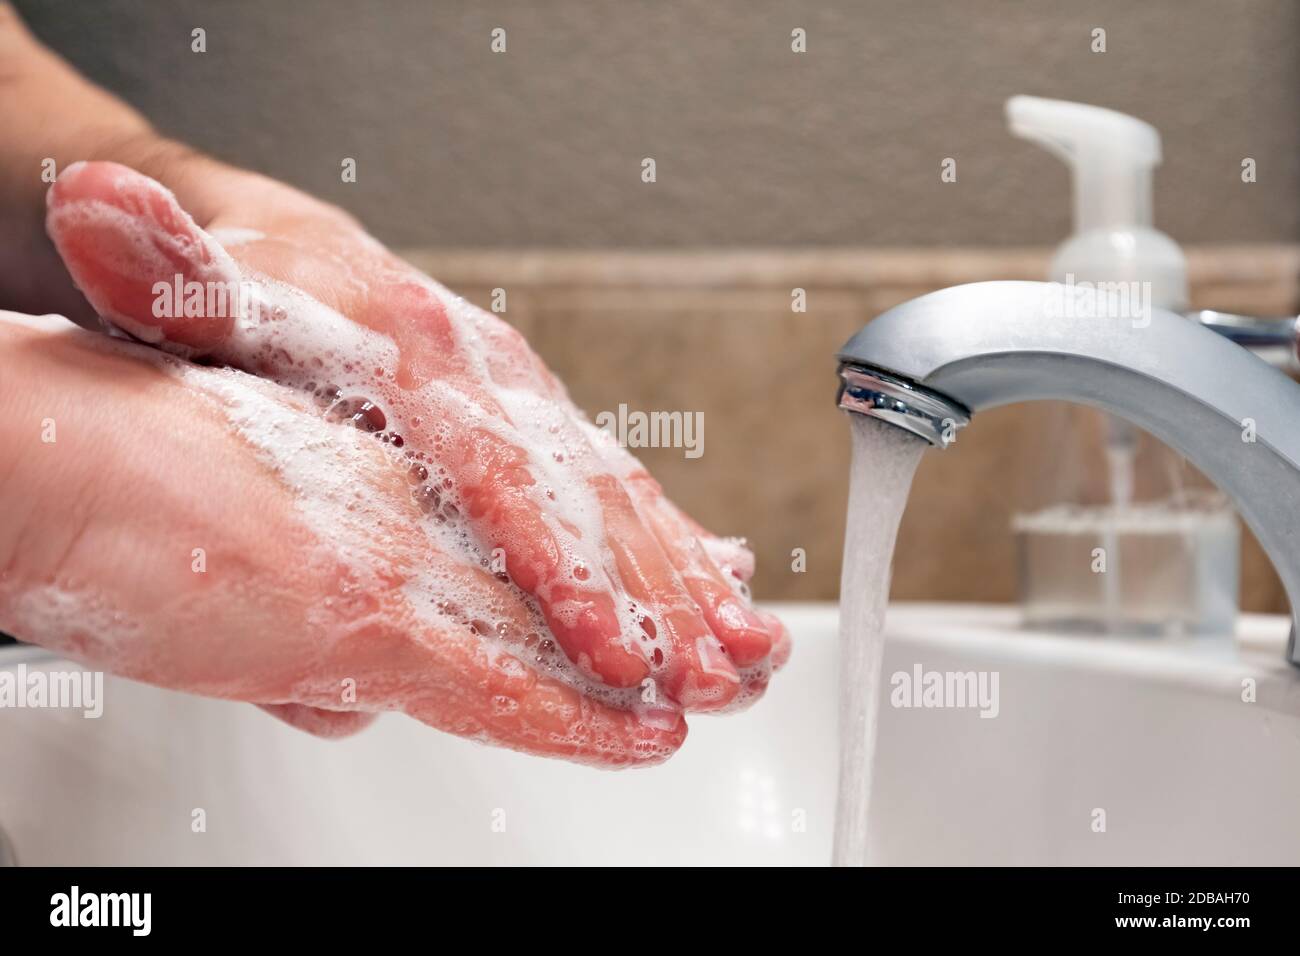 Washing hands with soap and water in bathroom sink, protection against covid-19 coronavirus flu viruses, hygiene to stay healthy Stock Photo